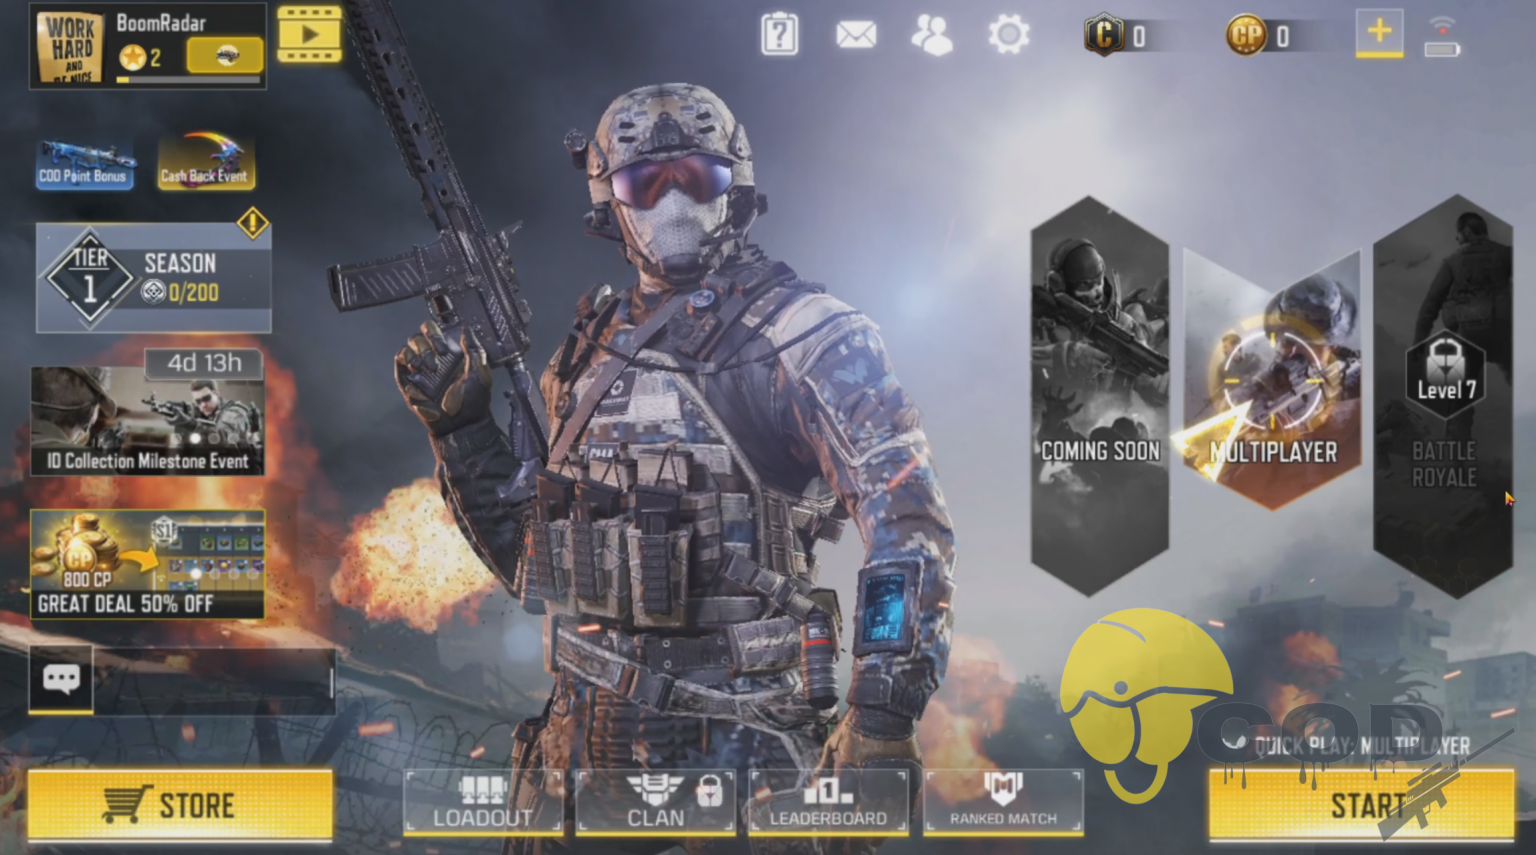 Download Latest Call of Duty Mobile APK & XAPK 2022